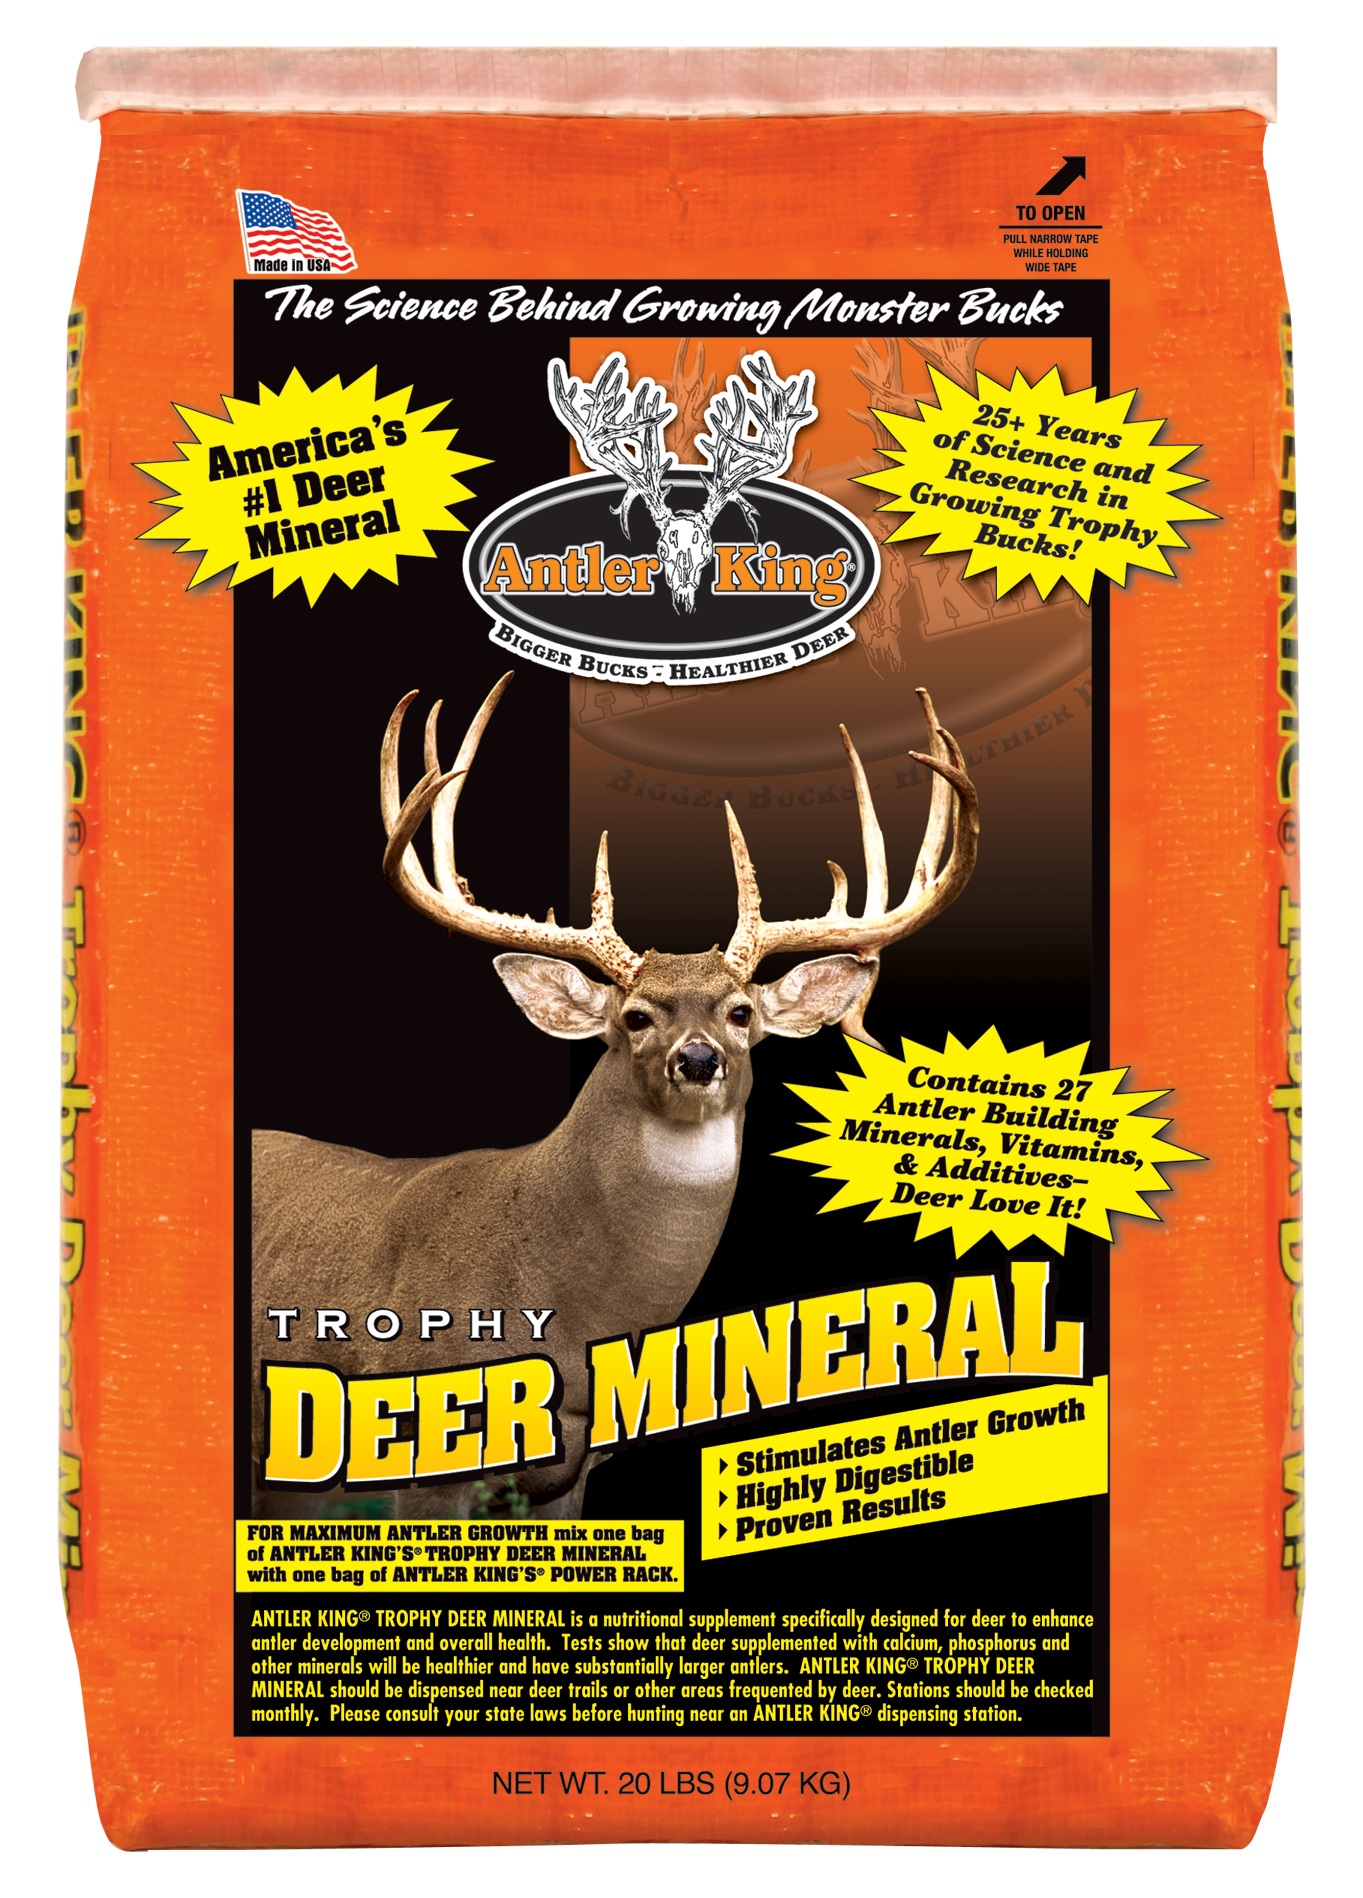 What mineral products should I use? - Antler King